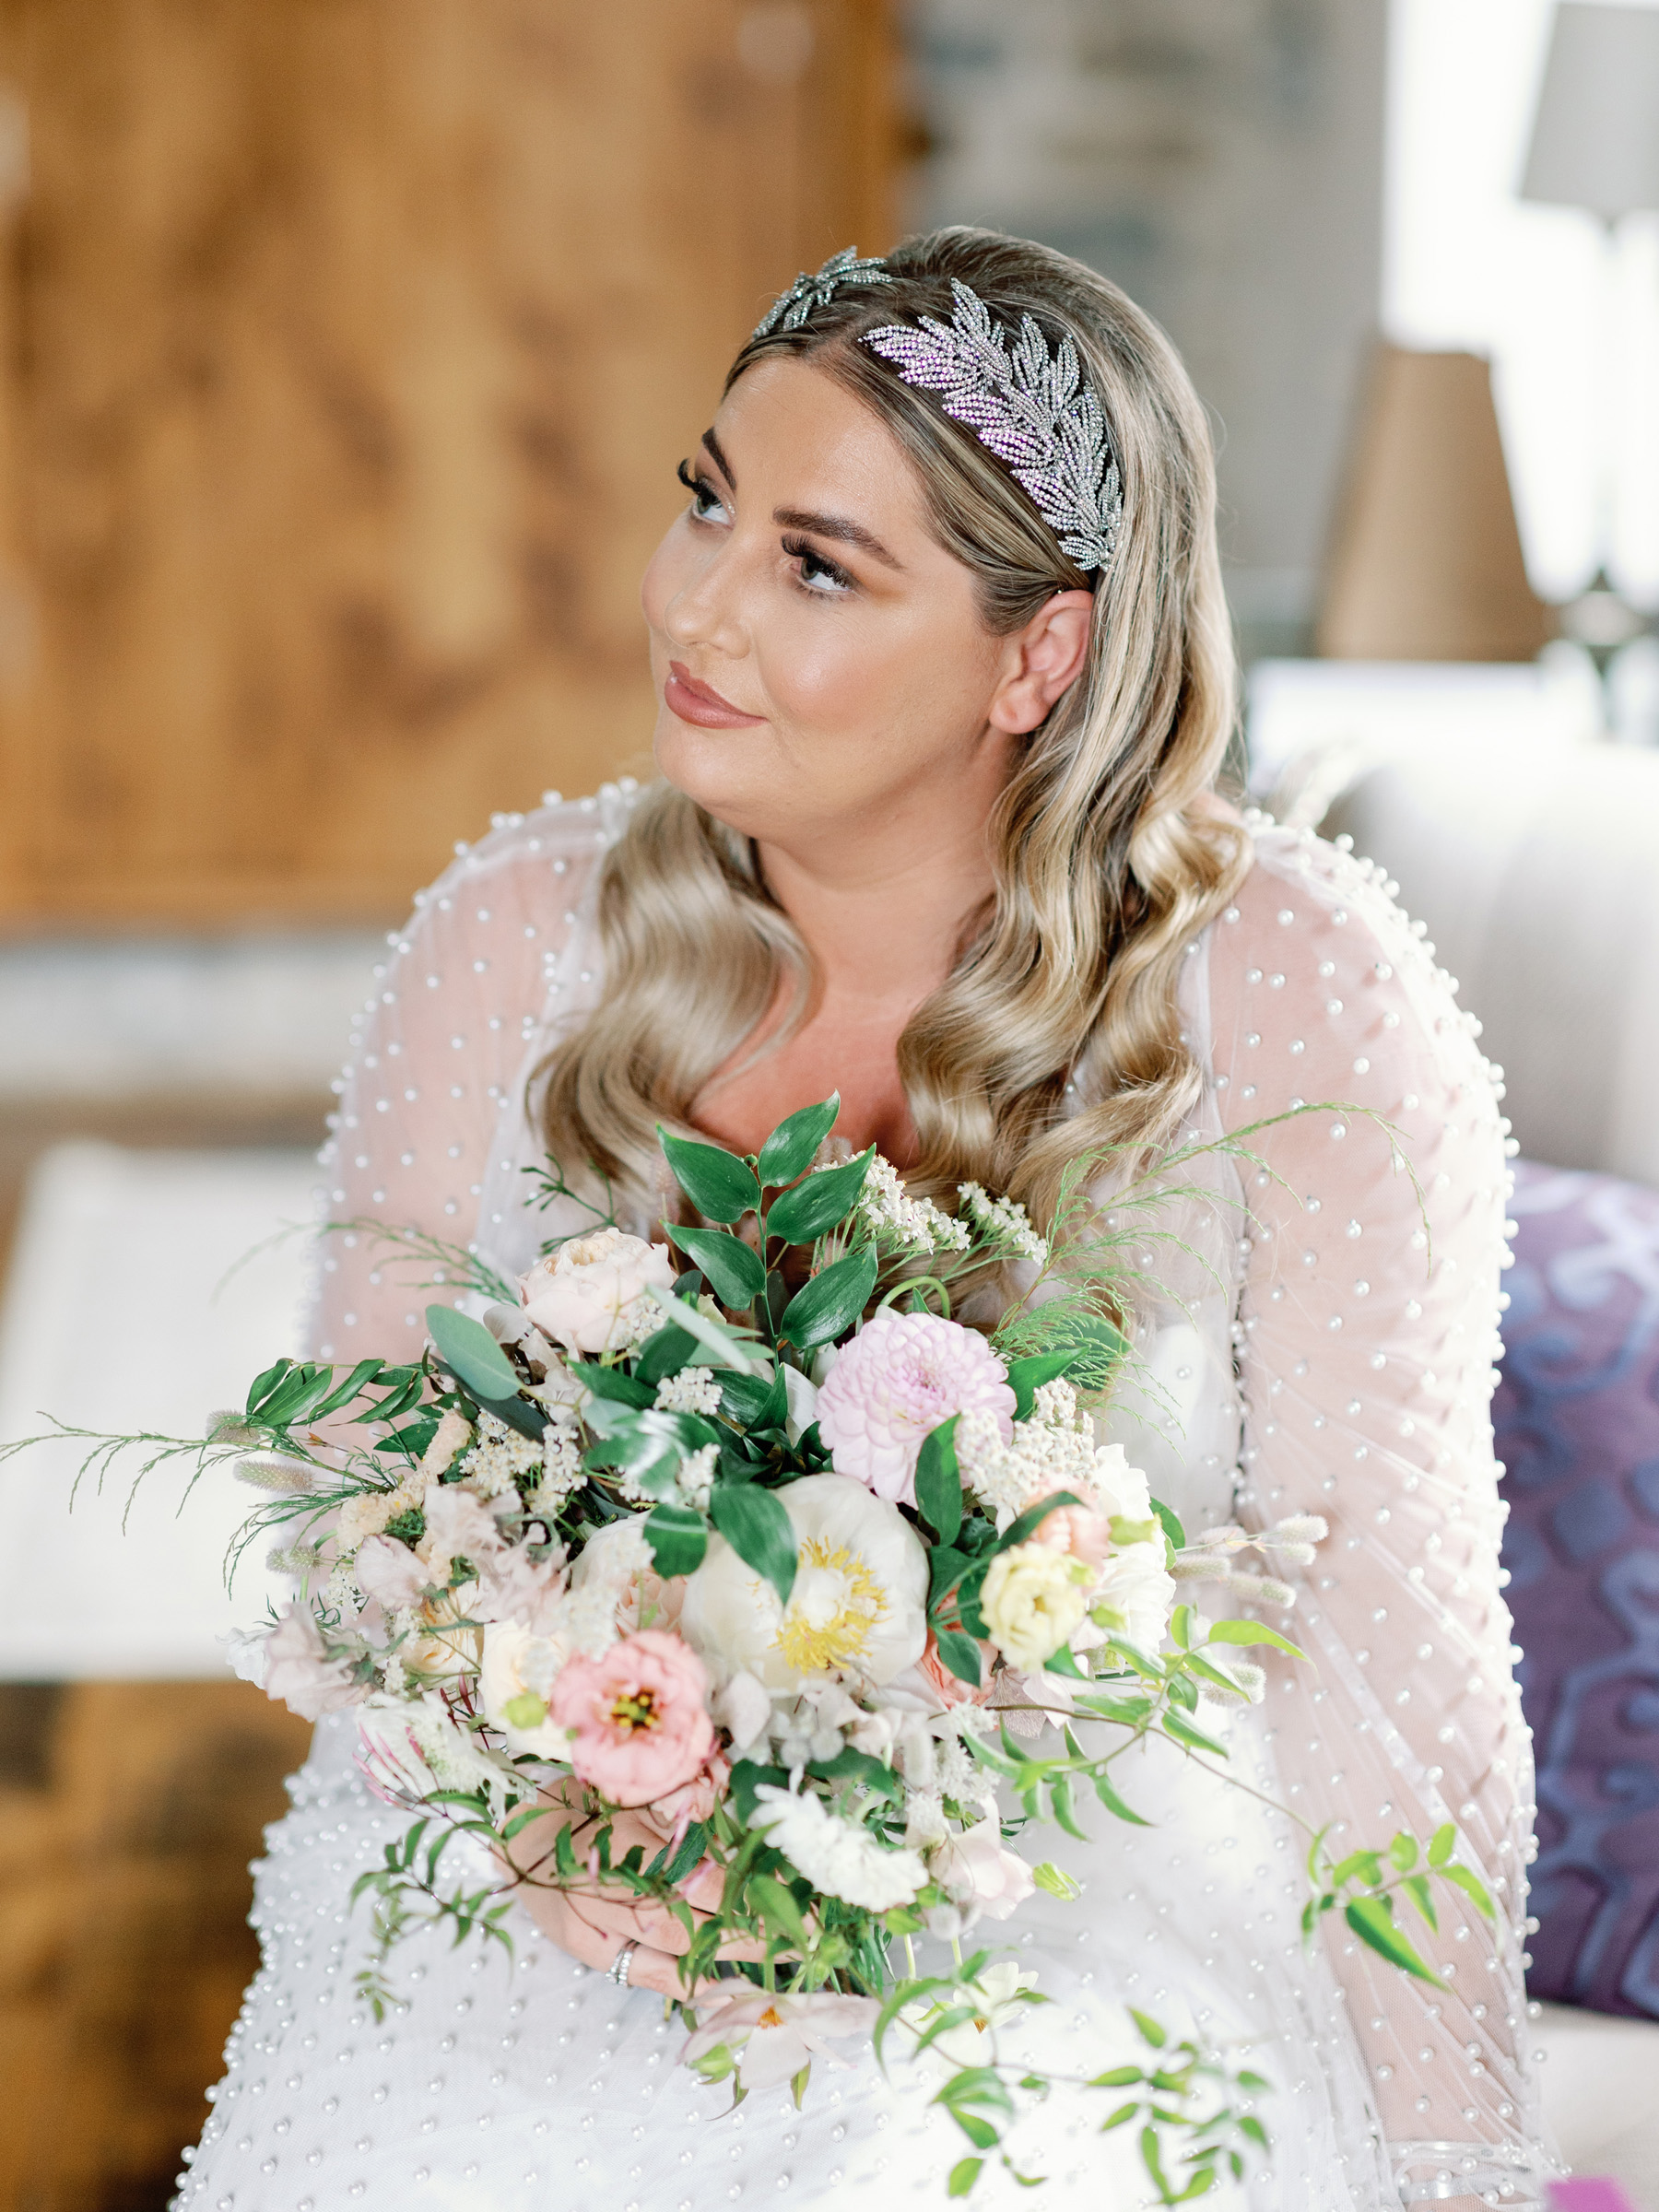 Pearl wedding dress by Willowby by Watters and elegant headpiece by Botias Accessories